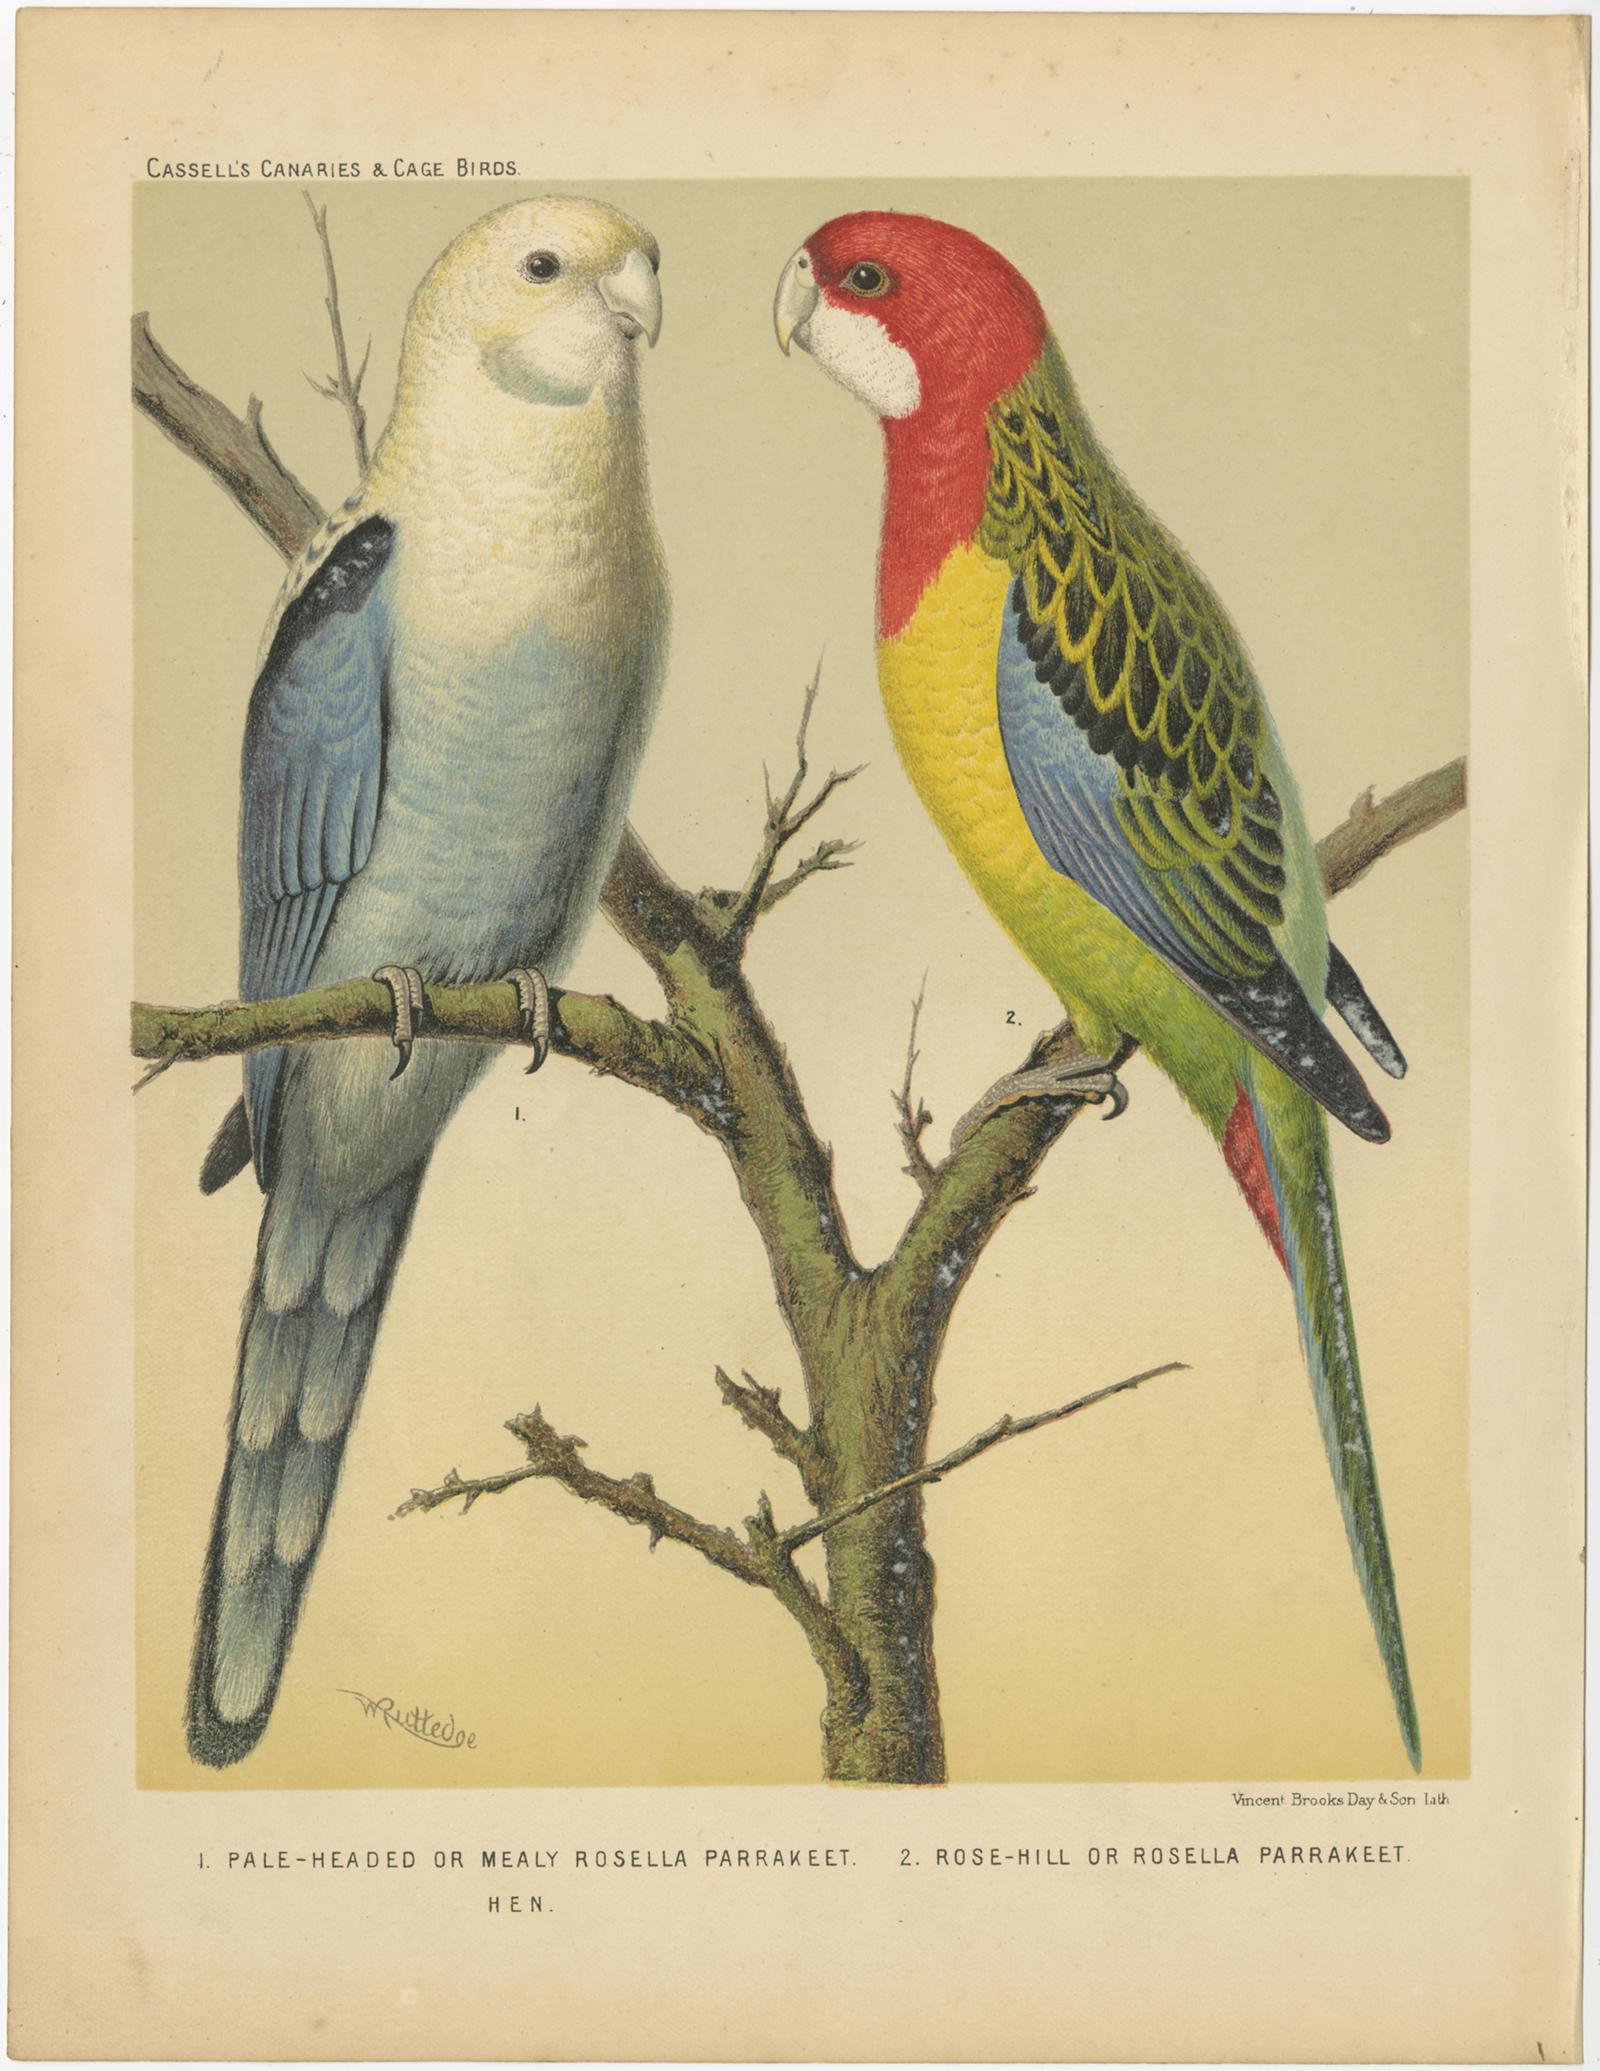 Antique bird print titled '1. Pale-Headed or Mealy Rosella Parrakeet. 2. Rose-Hill or Rosella Parrakeet.' Old bird print depicting the pale-headed rosella (Platycercus adscitus), Rose-Hill or Rosella Parrakeet. This print originates from: